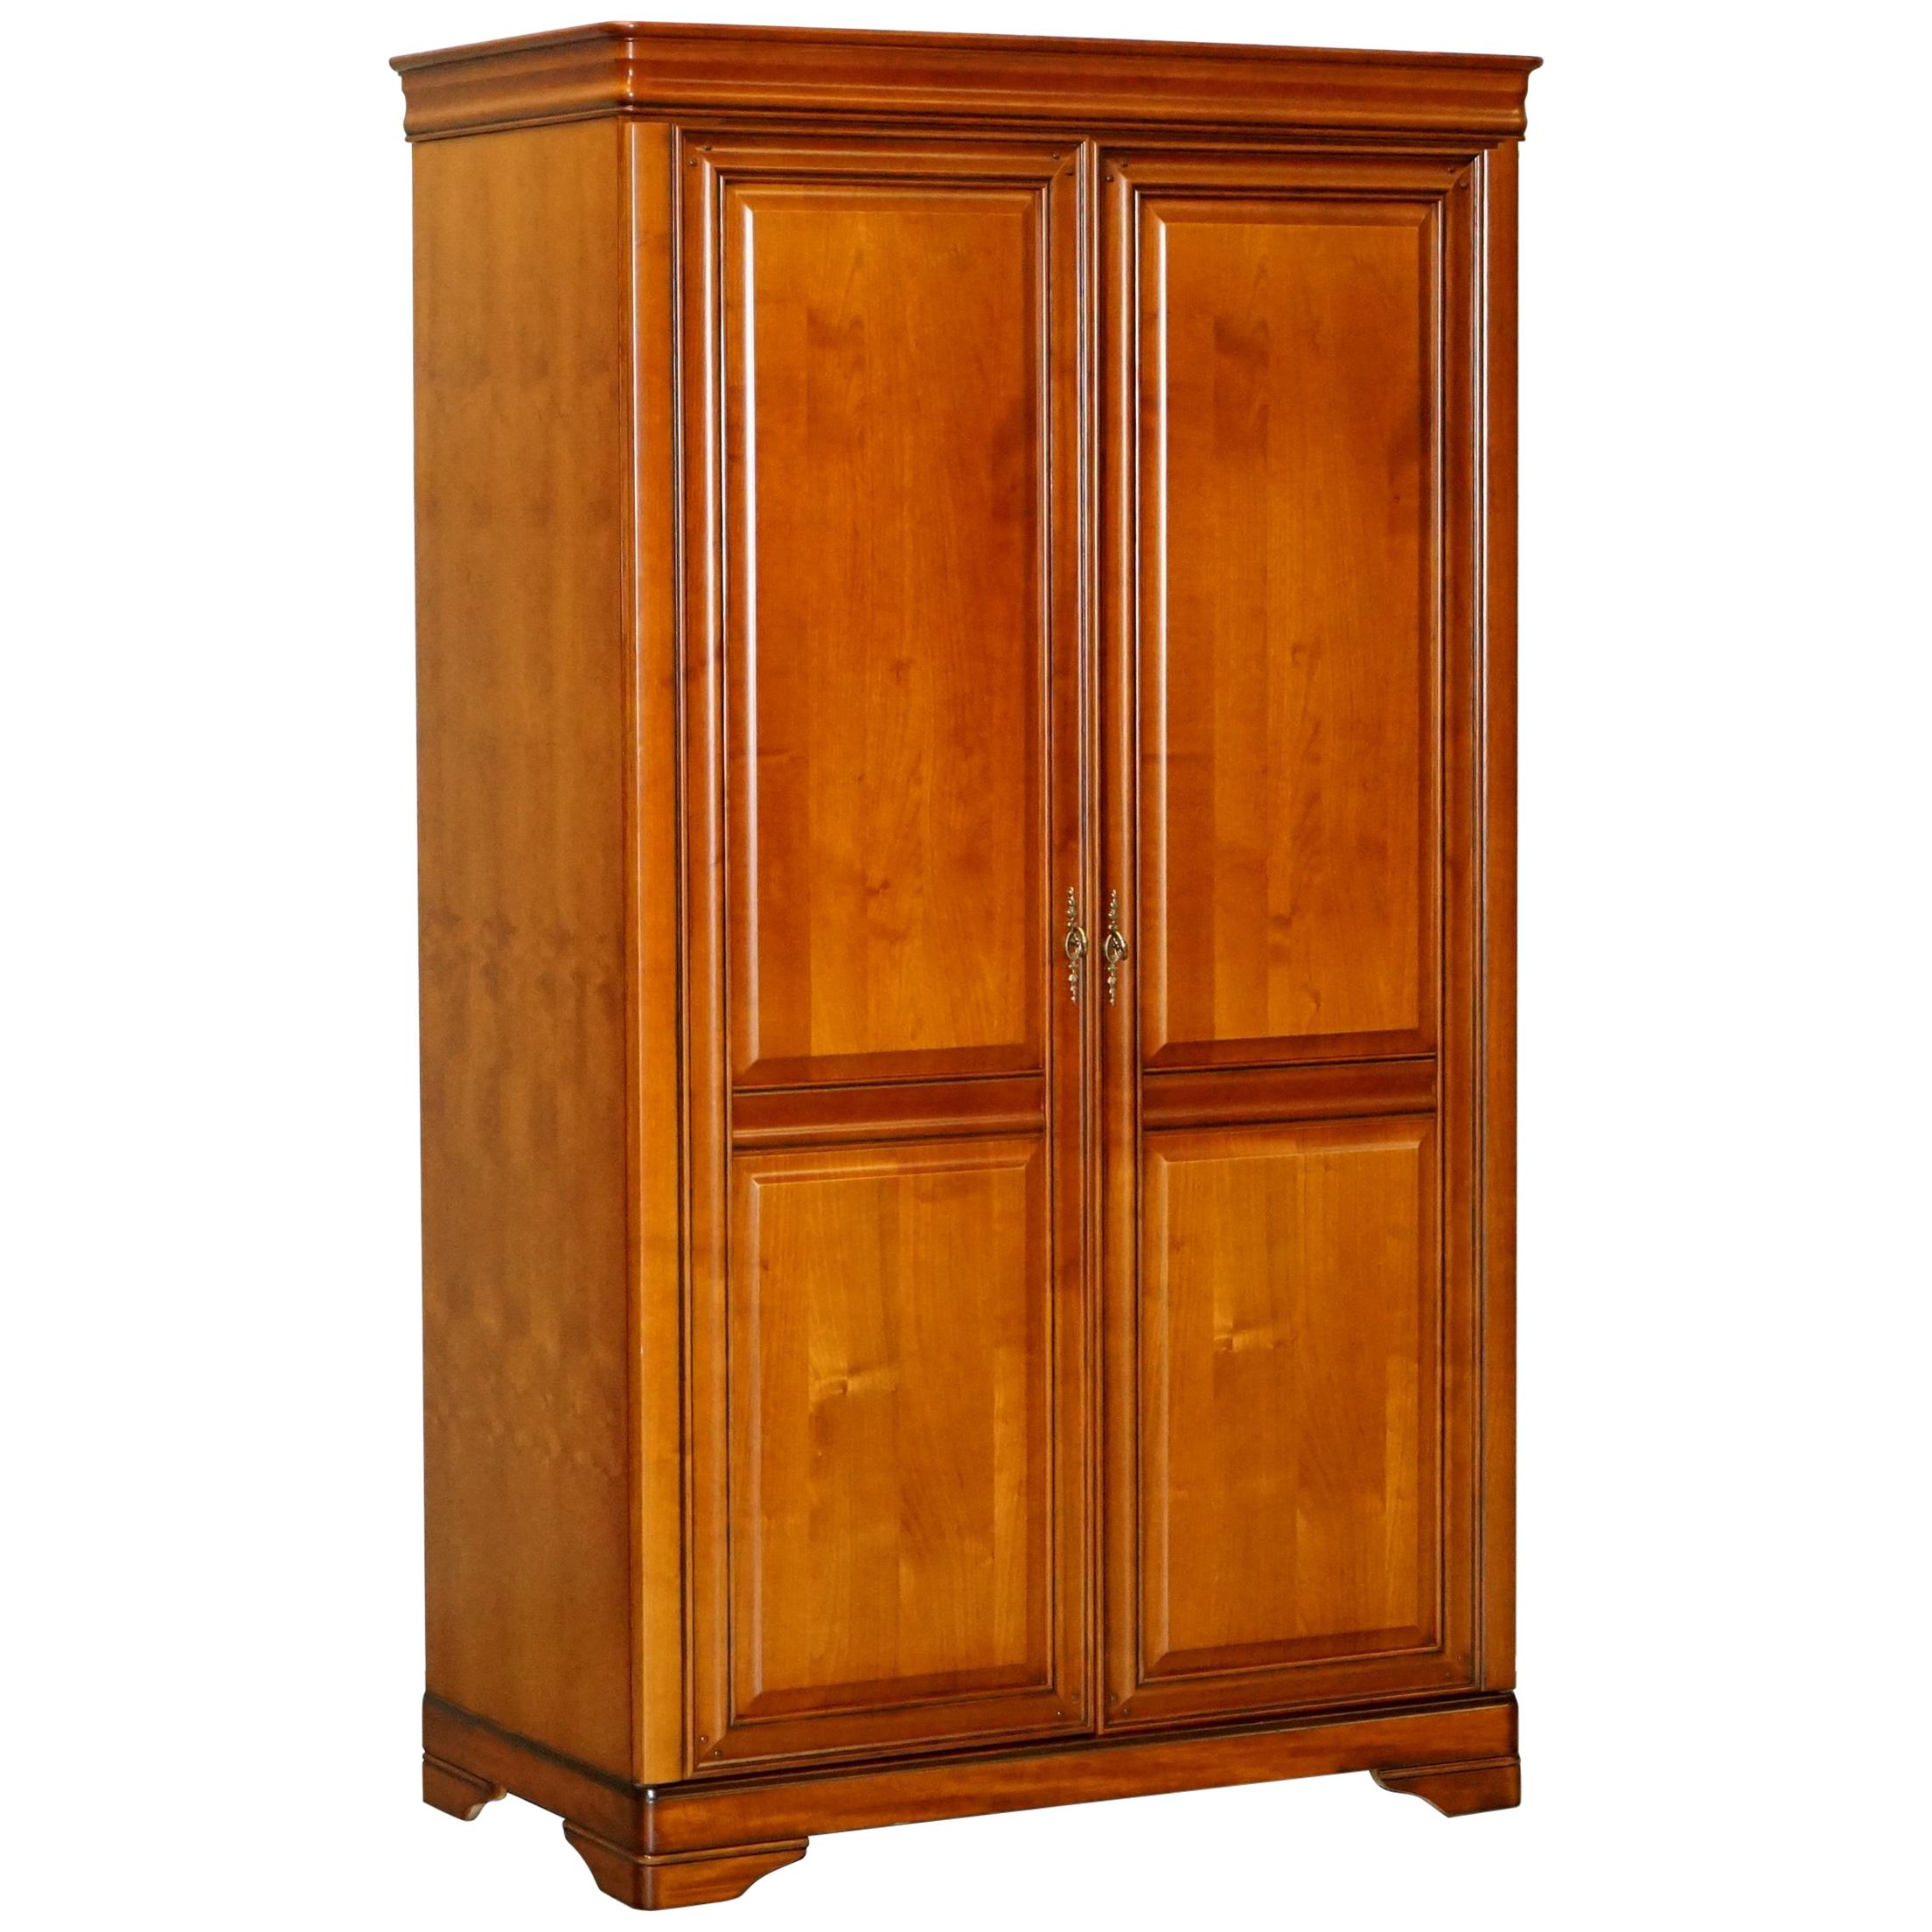 Stunning Solid Cherry Wood Double Bank Wardrobe Part of a Large Suite Must See